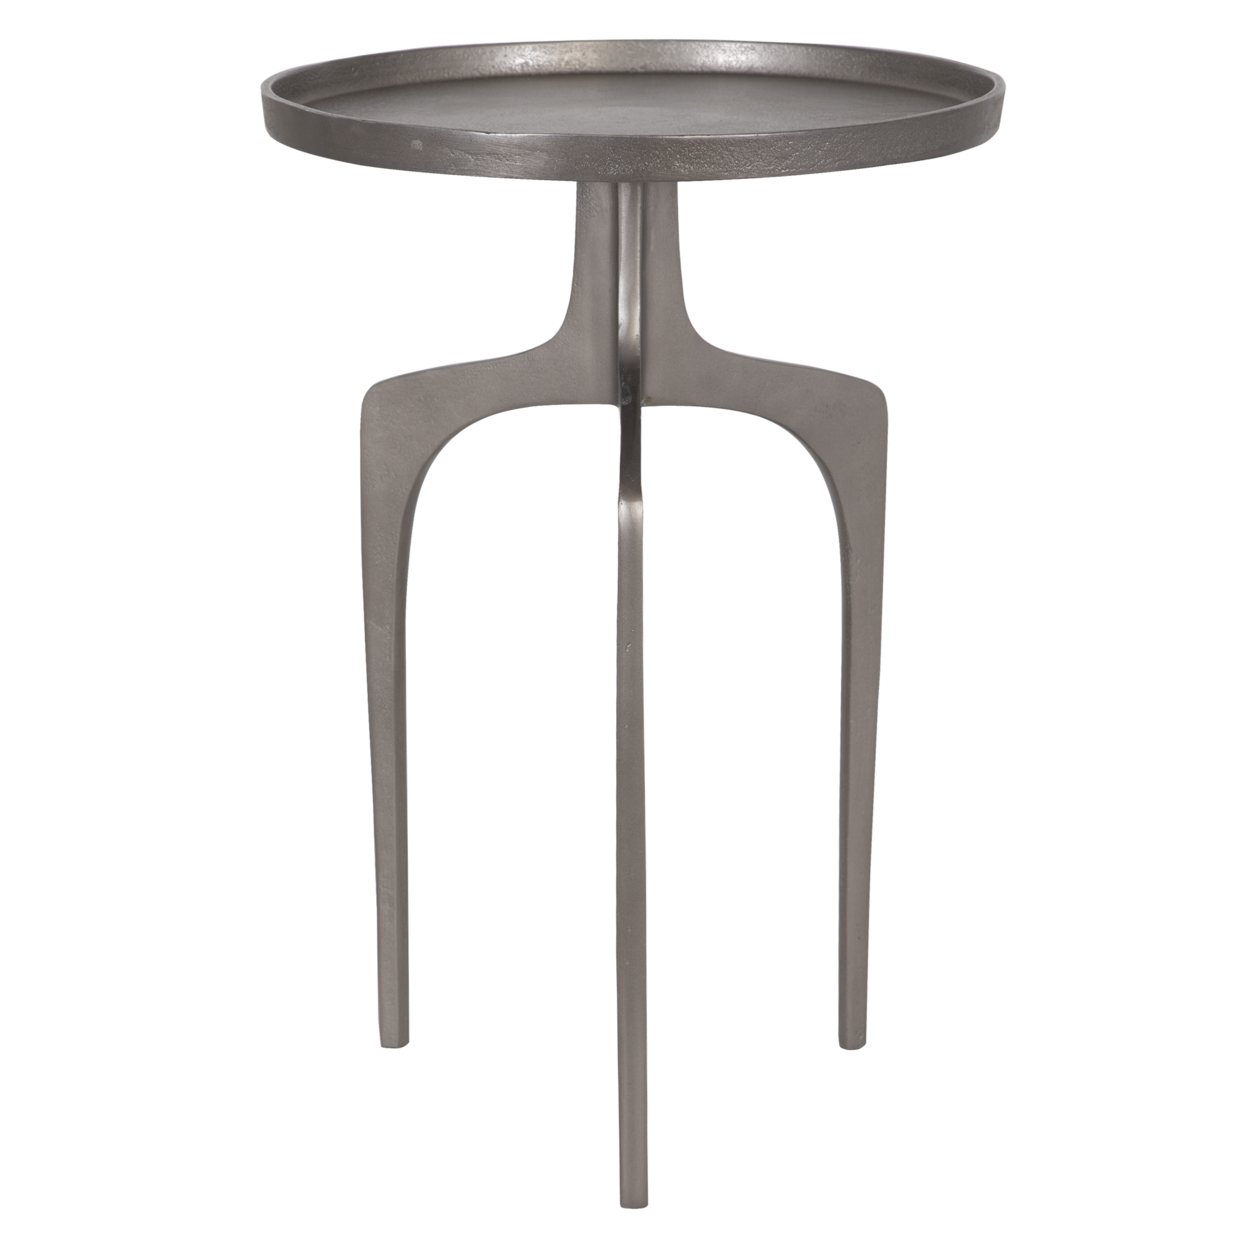 22 Inch Metal Round Accent Table, Three Curved Legs, Nickel Silver- Saltoro Sherpi